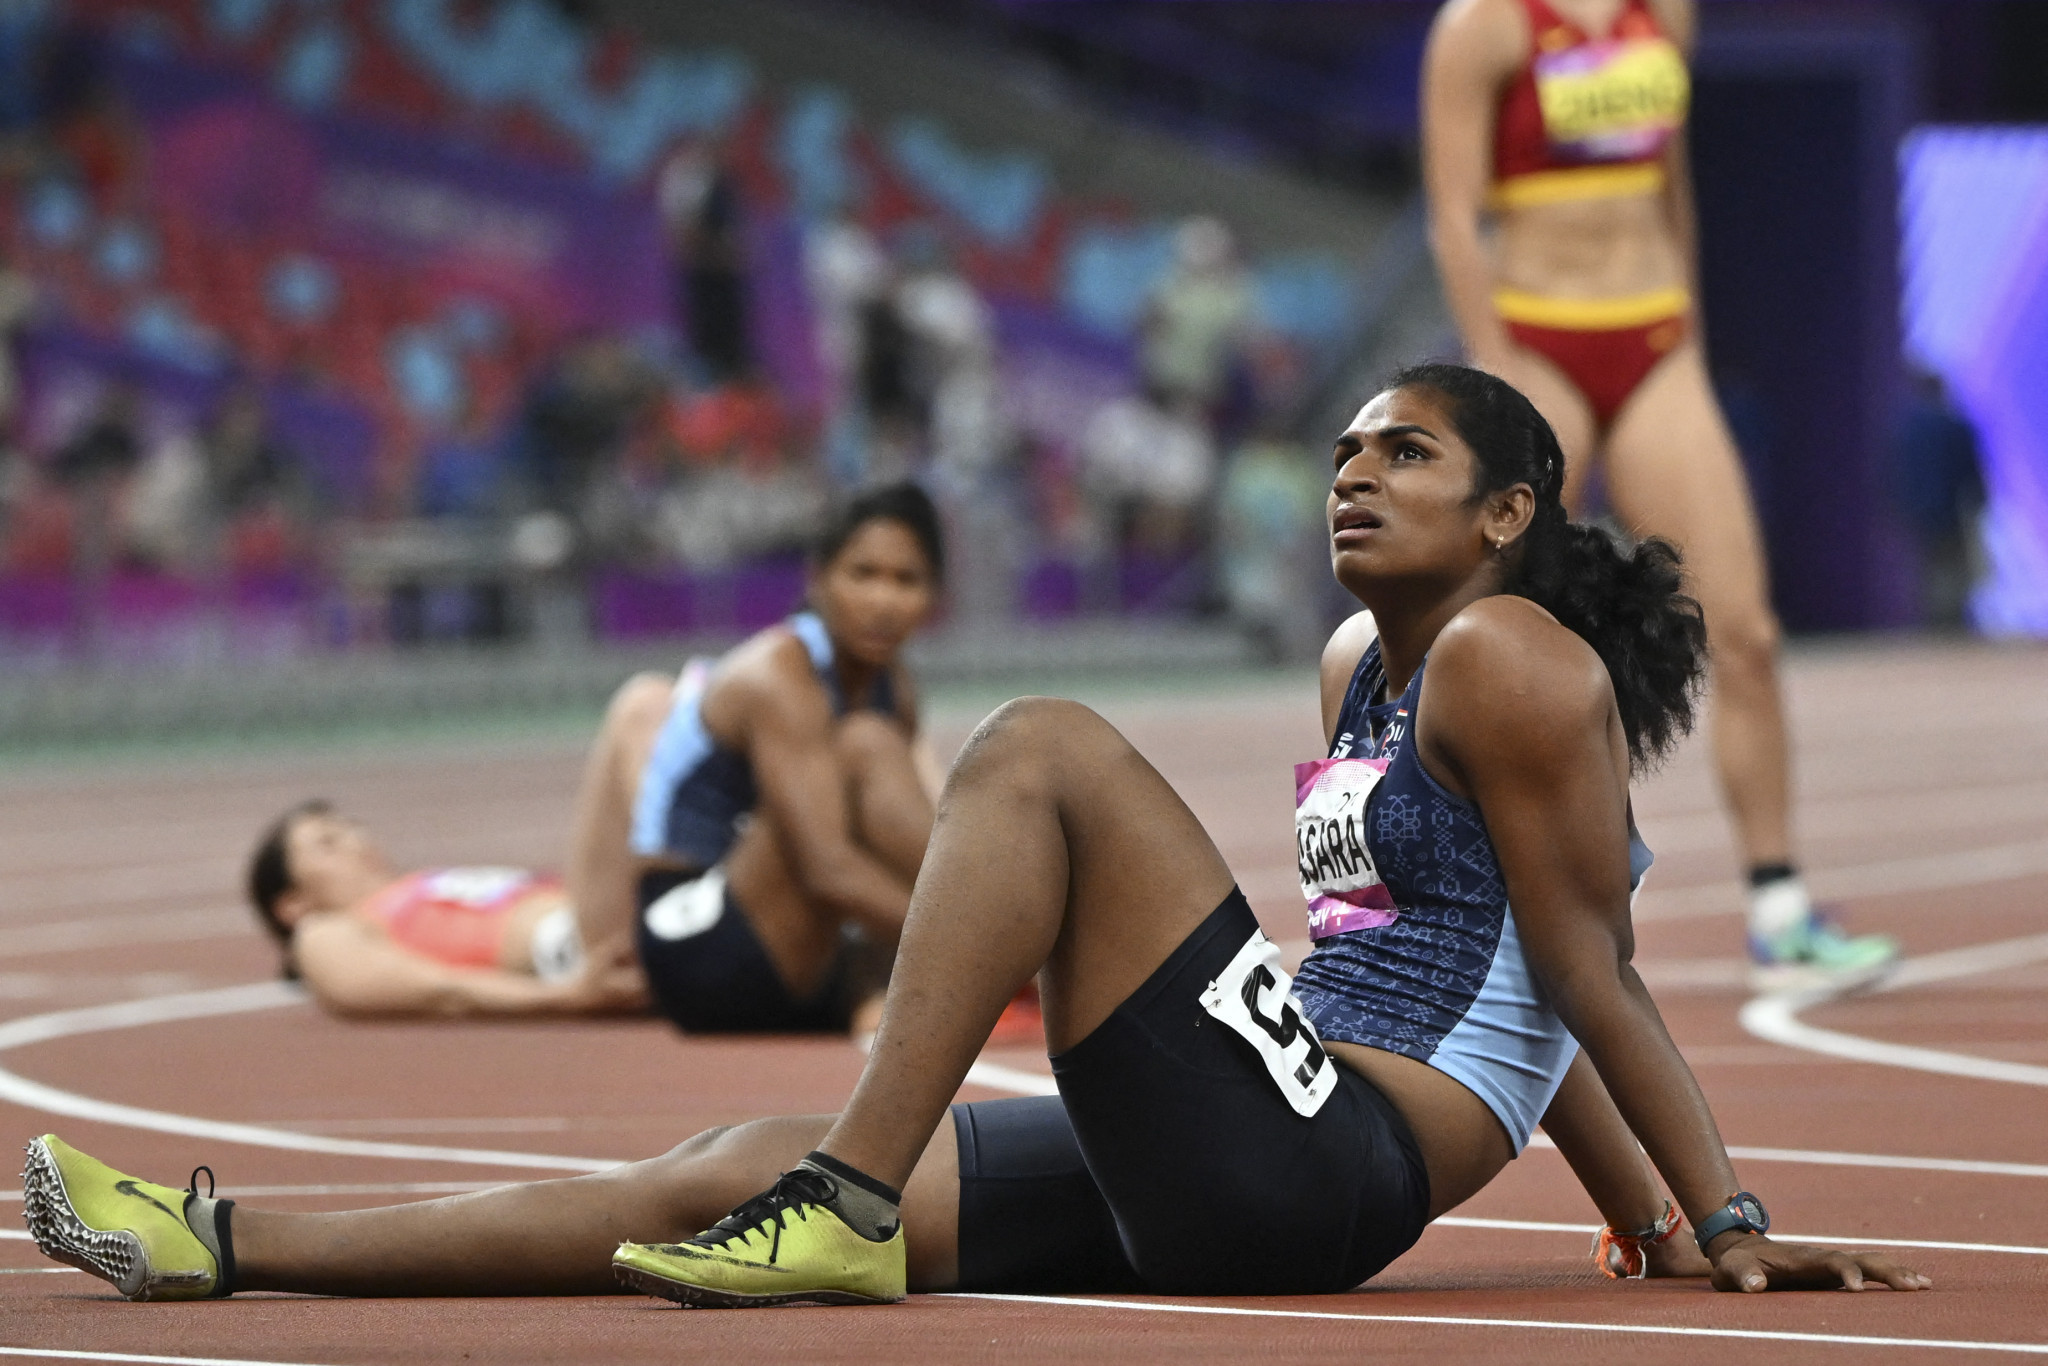 Nandini Agasara is said to be furious with Swapna Barman's claim that she is transgender ©Getty Images